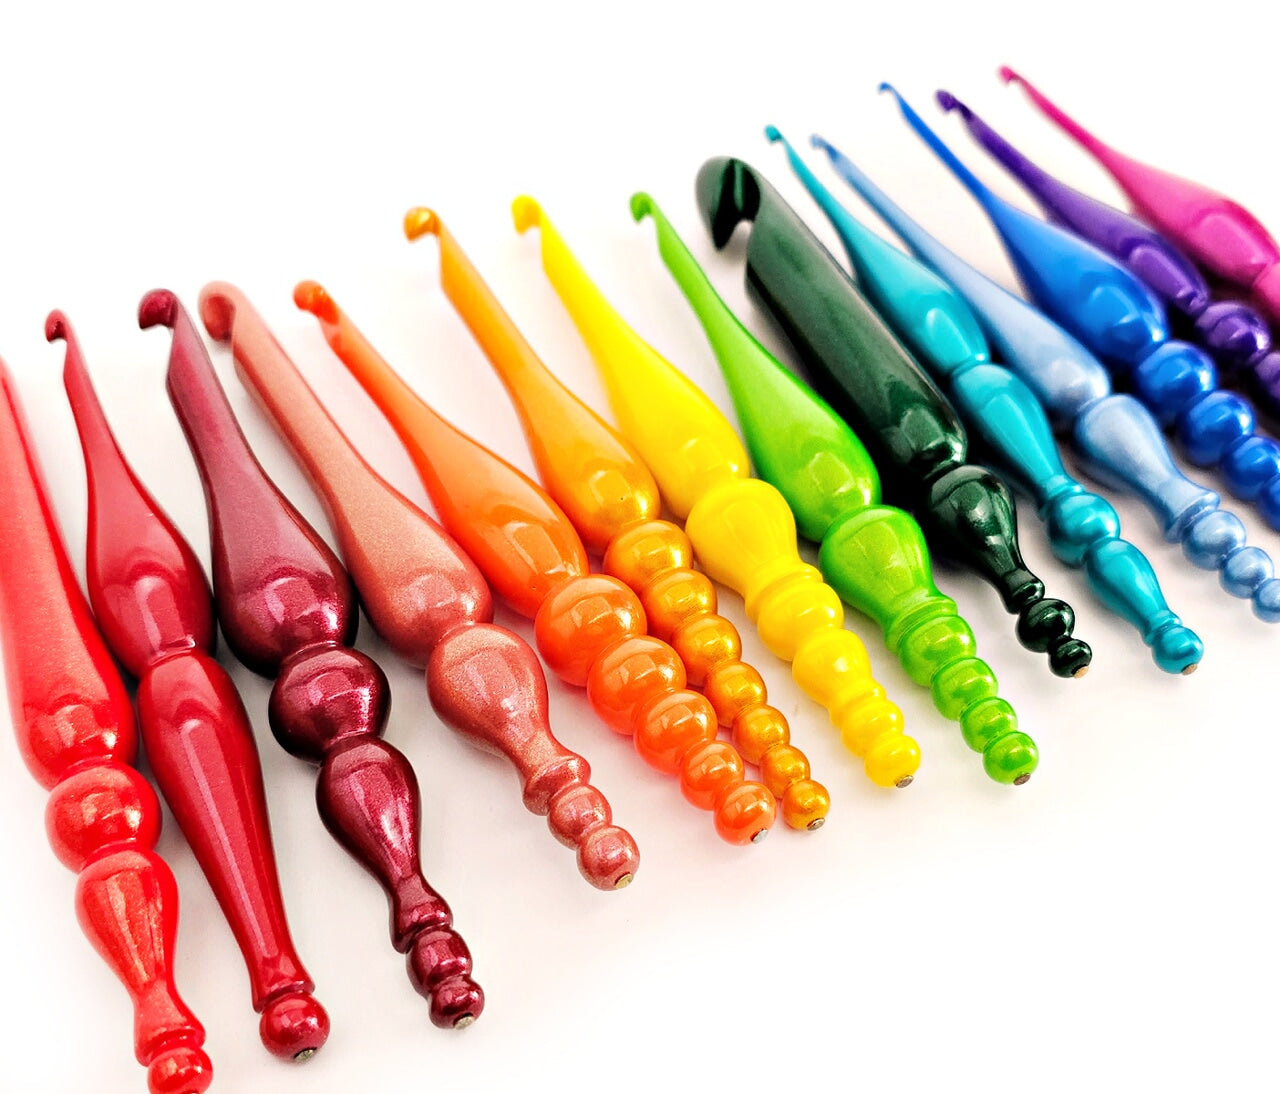 Candy Shop Crochet Hook Review - Crystalized Designs